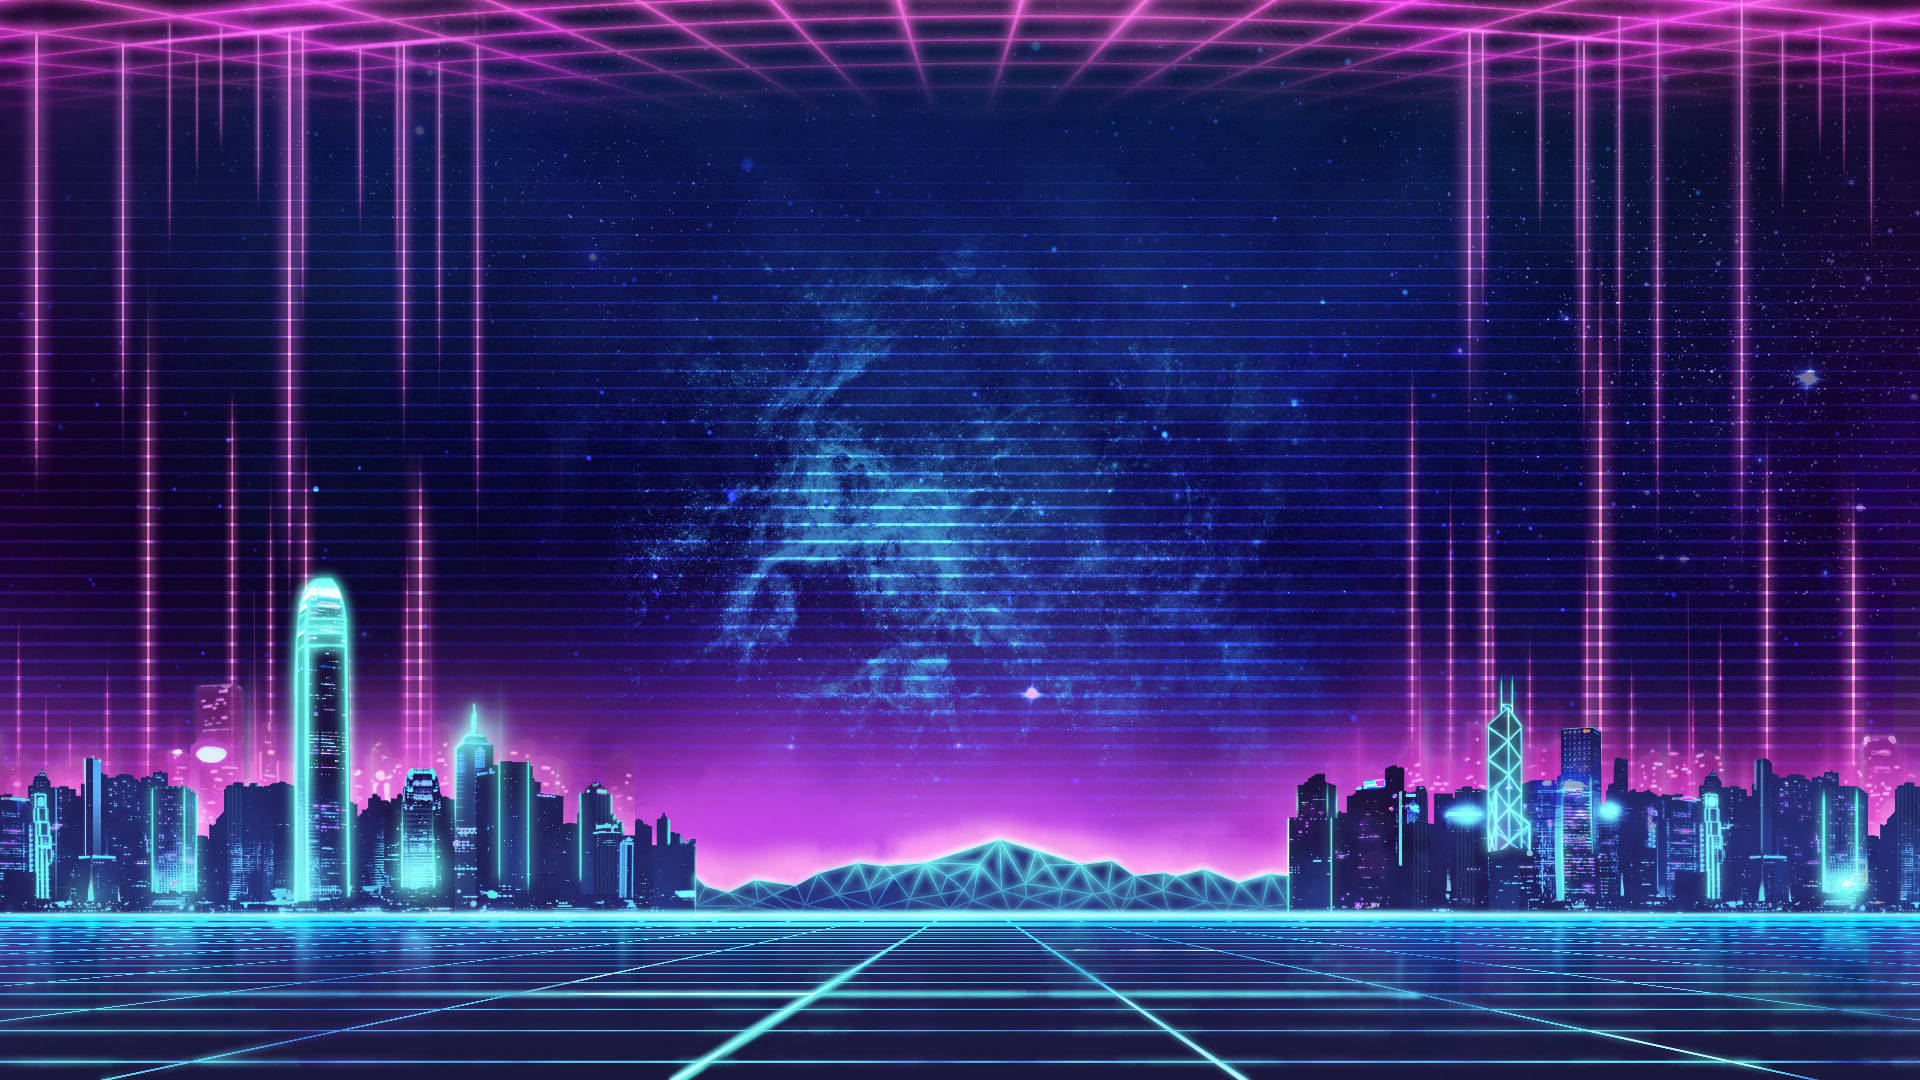 Inspiring Synthwave Landscape With Mountain Cityscape Wallpaper